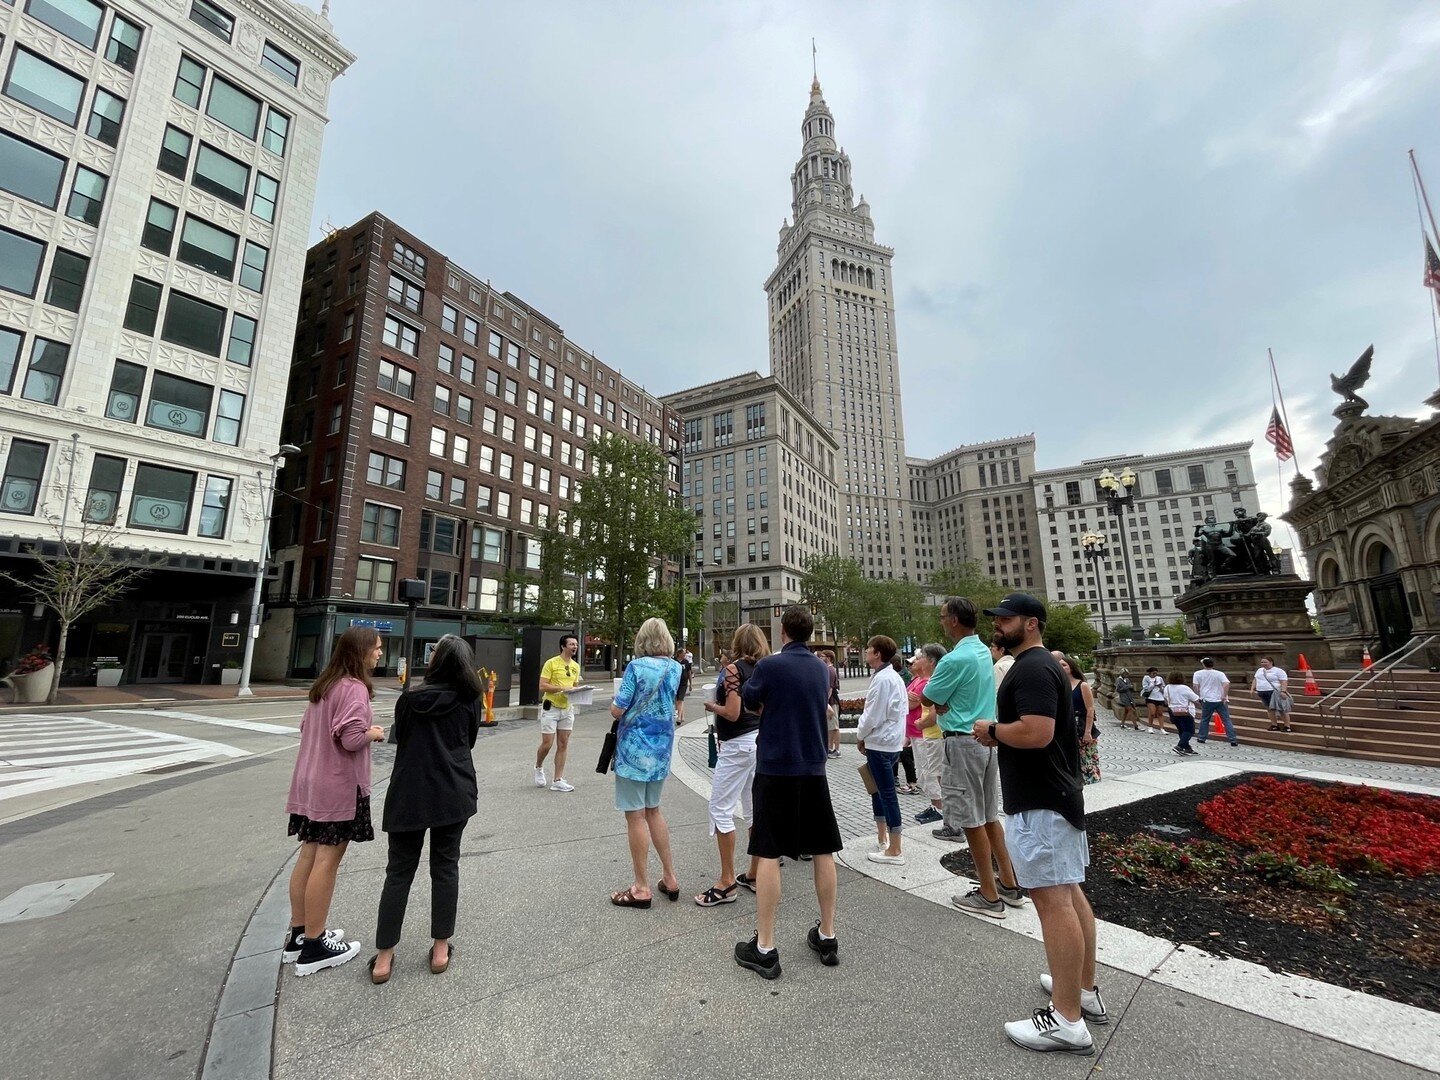 Take a Hike&reg; offers free tours of unique and historic neighborhoods in Cleveland! ⁠
⁠
We offer In-Person, Self-Guided and On-Demand Tours for any group anywhere.⁠
⁠
takeahikecle.com